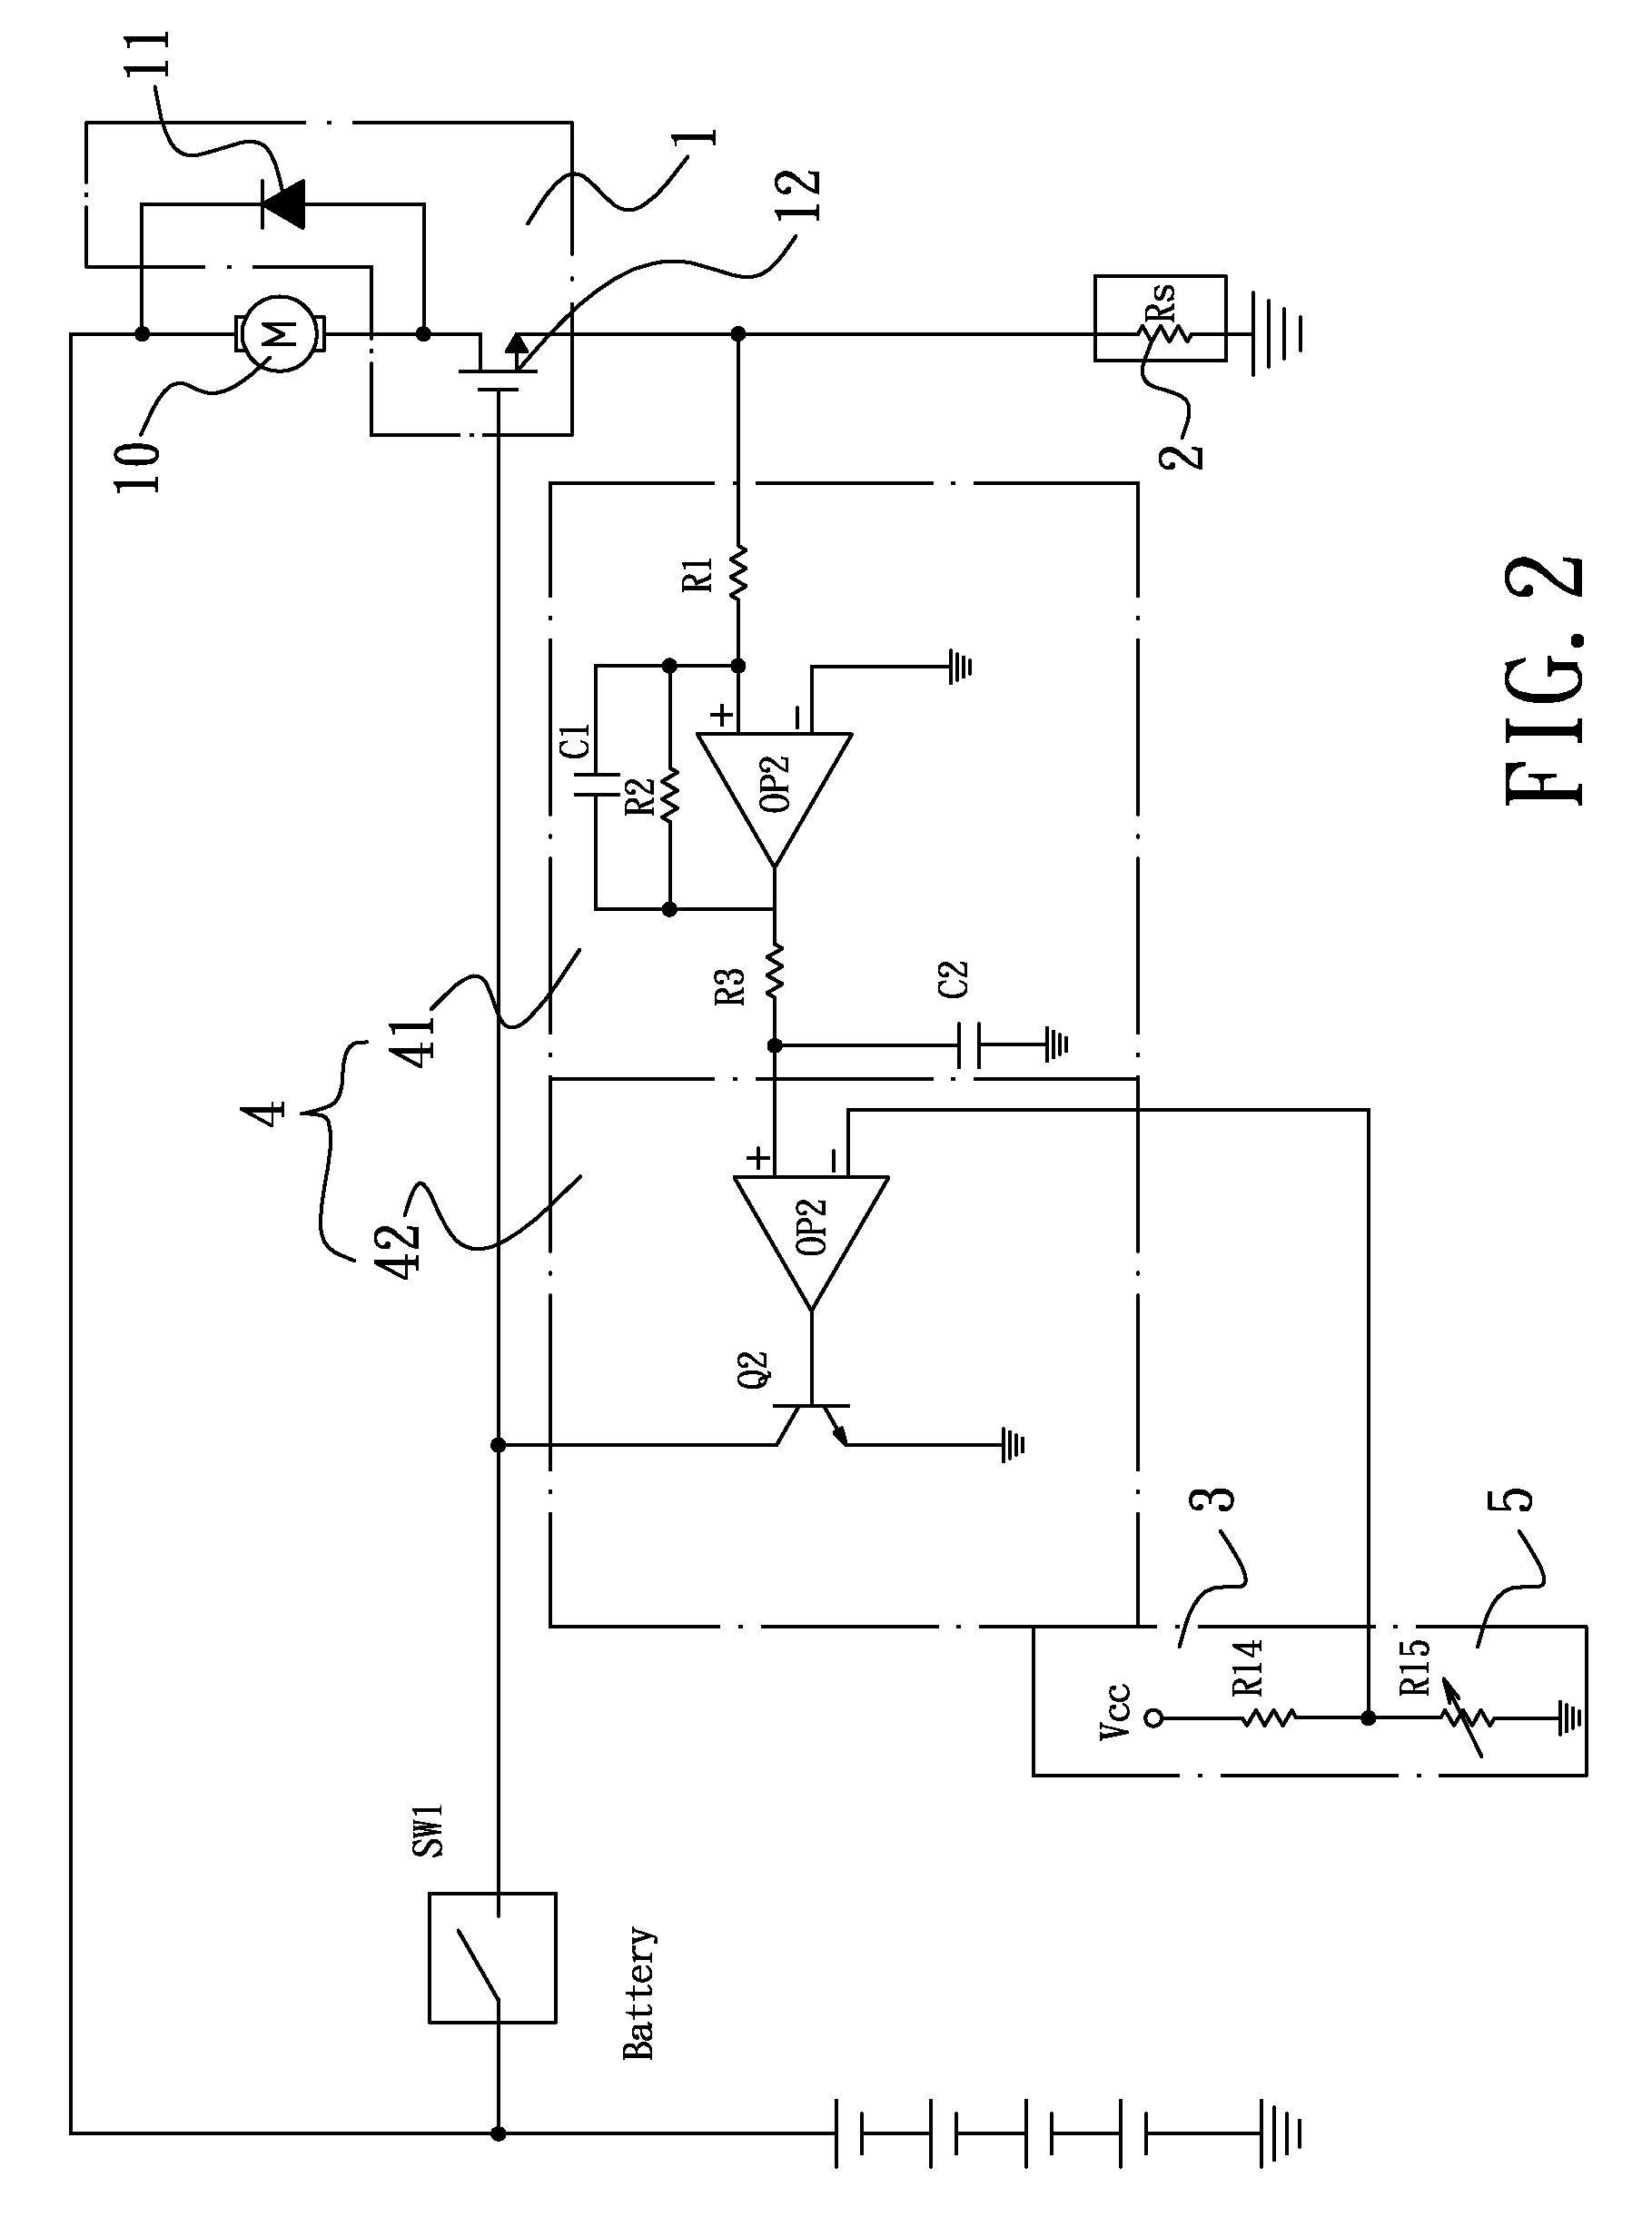 Torque control circuit for electrical motor